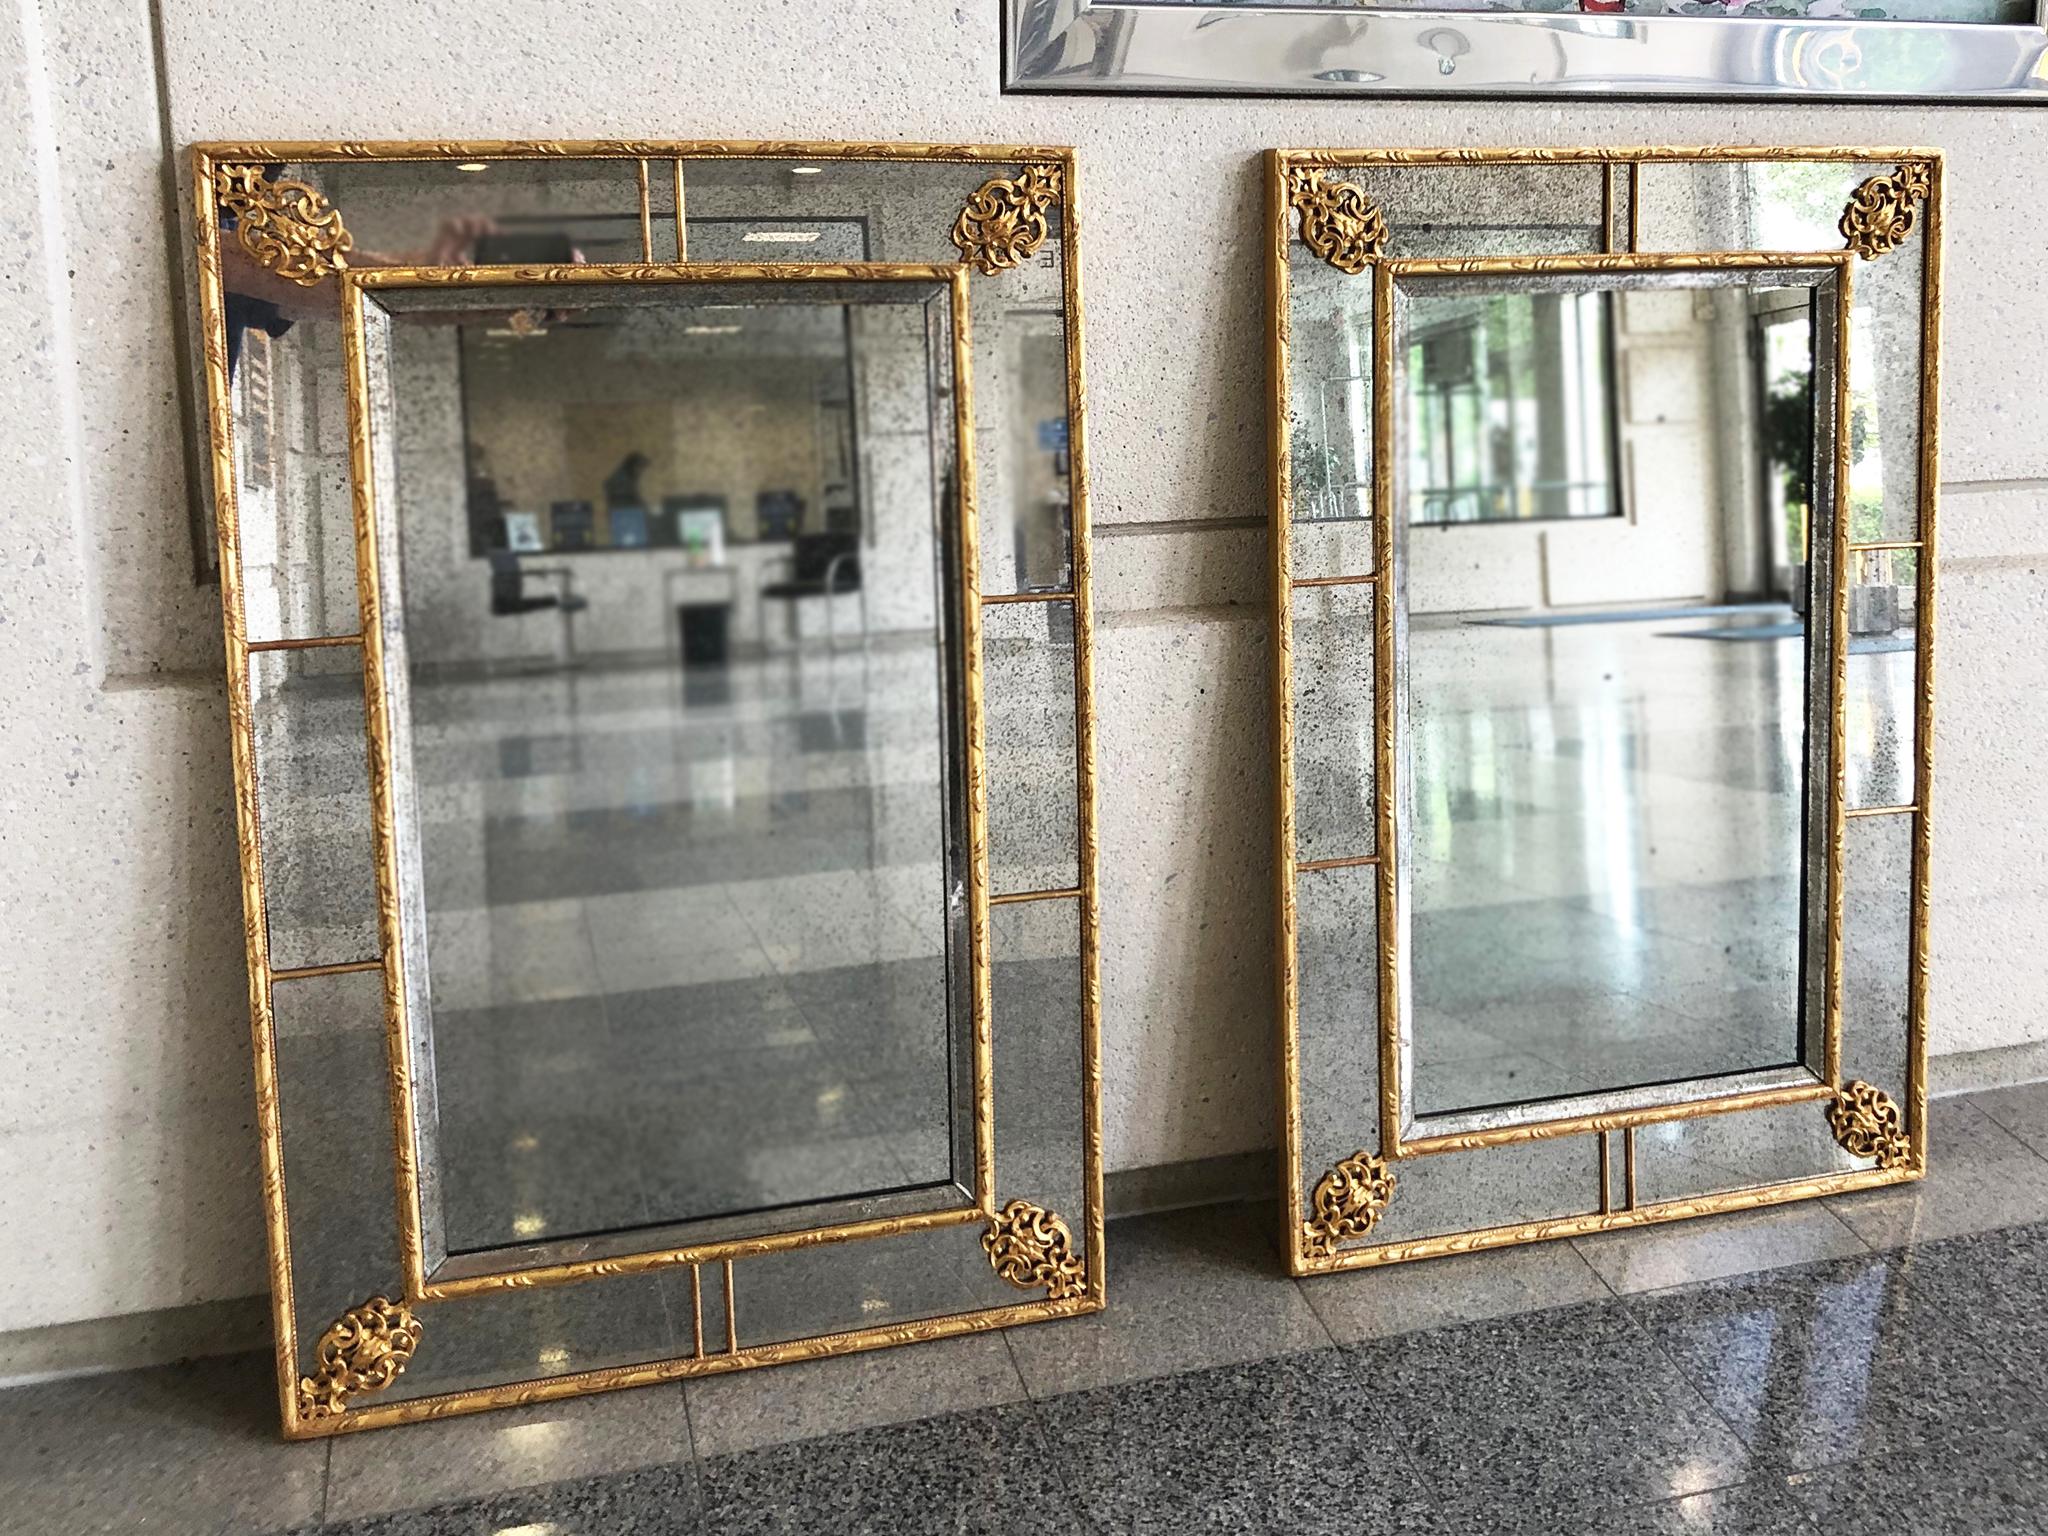 A pair of vintage wall mirrors, crafted in the 20th century. They are designed in the neoclassical style and comprised of antiqued glass that has been paneled and beautifully trimmed in giltwood. The mirrors are also backed with a protective sheet